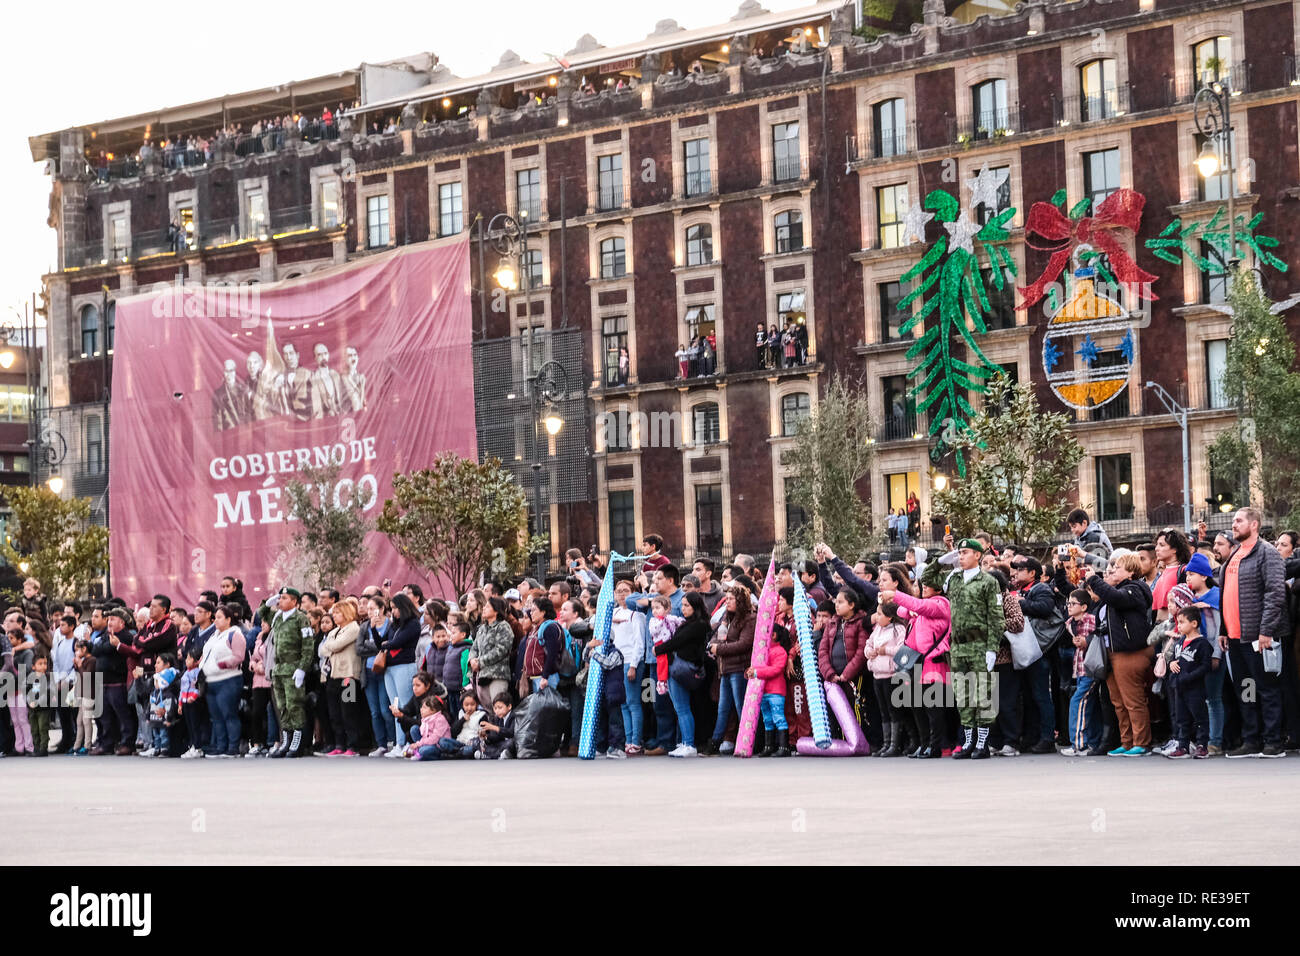 Military police cadre taking down Mexico national flag at Zocalo, Mexico City, with people watching Stock Photo